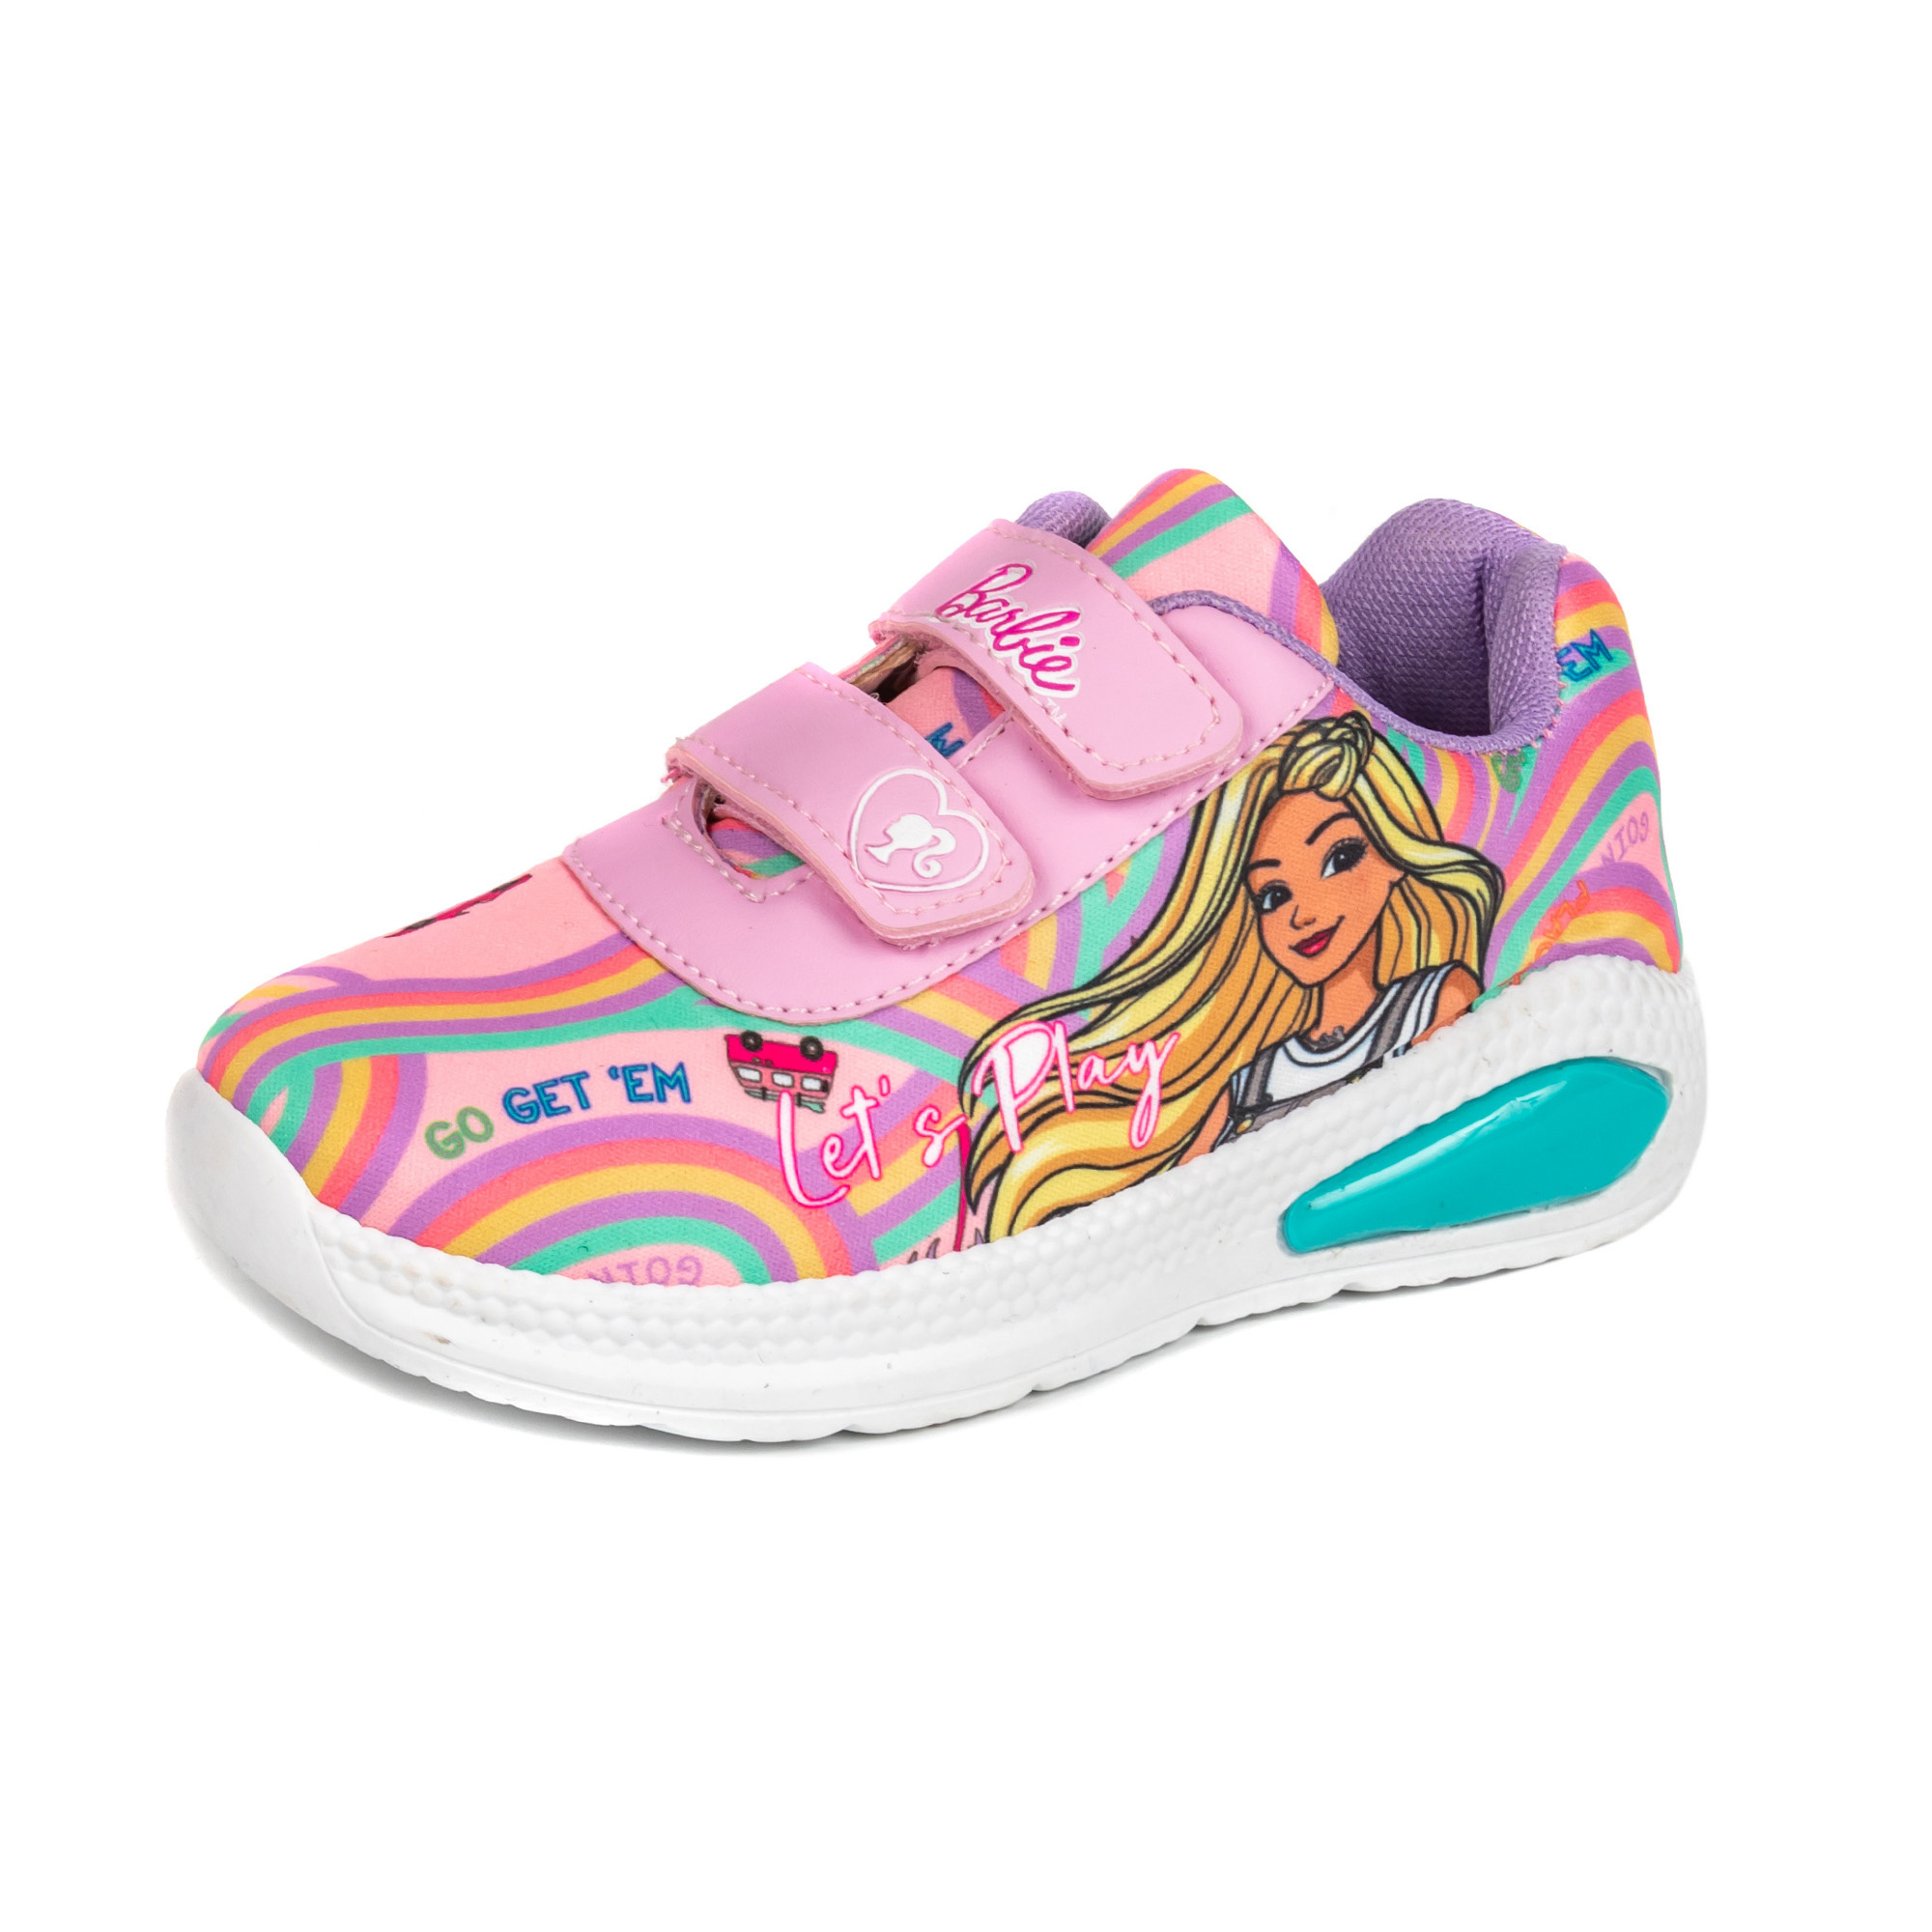 Sneaker Shoes, Children Shoes ,Injection shoes ,Pink Textile with sublimation printing +Pu Upper, PVC injection Outsole